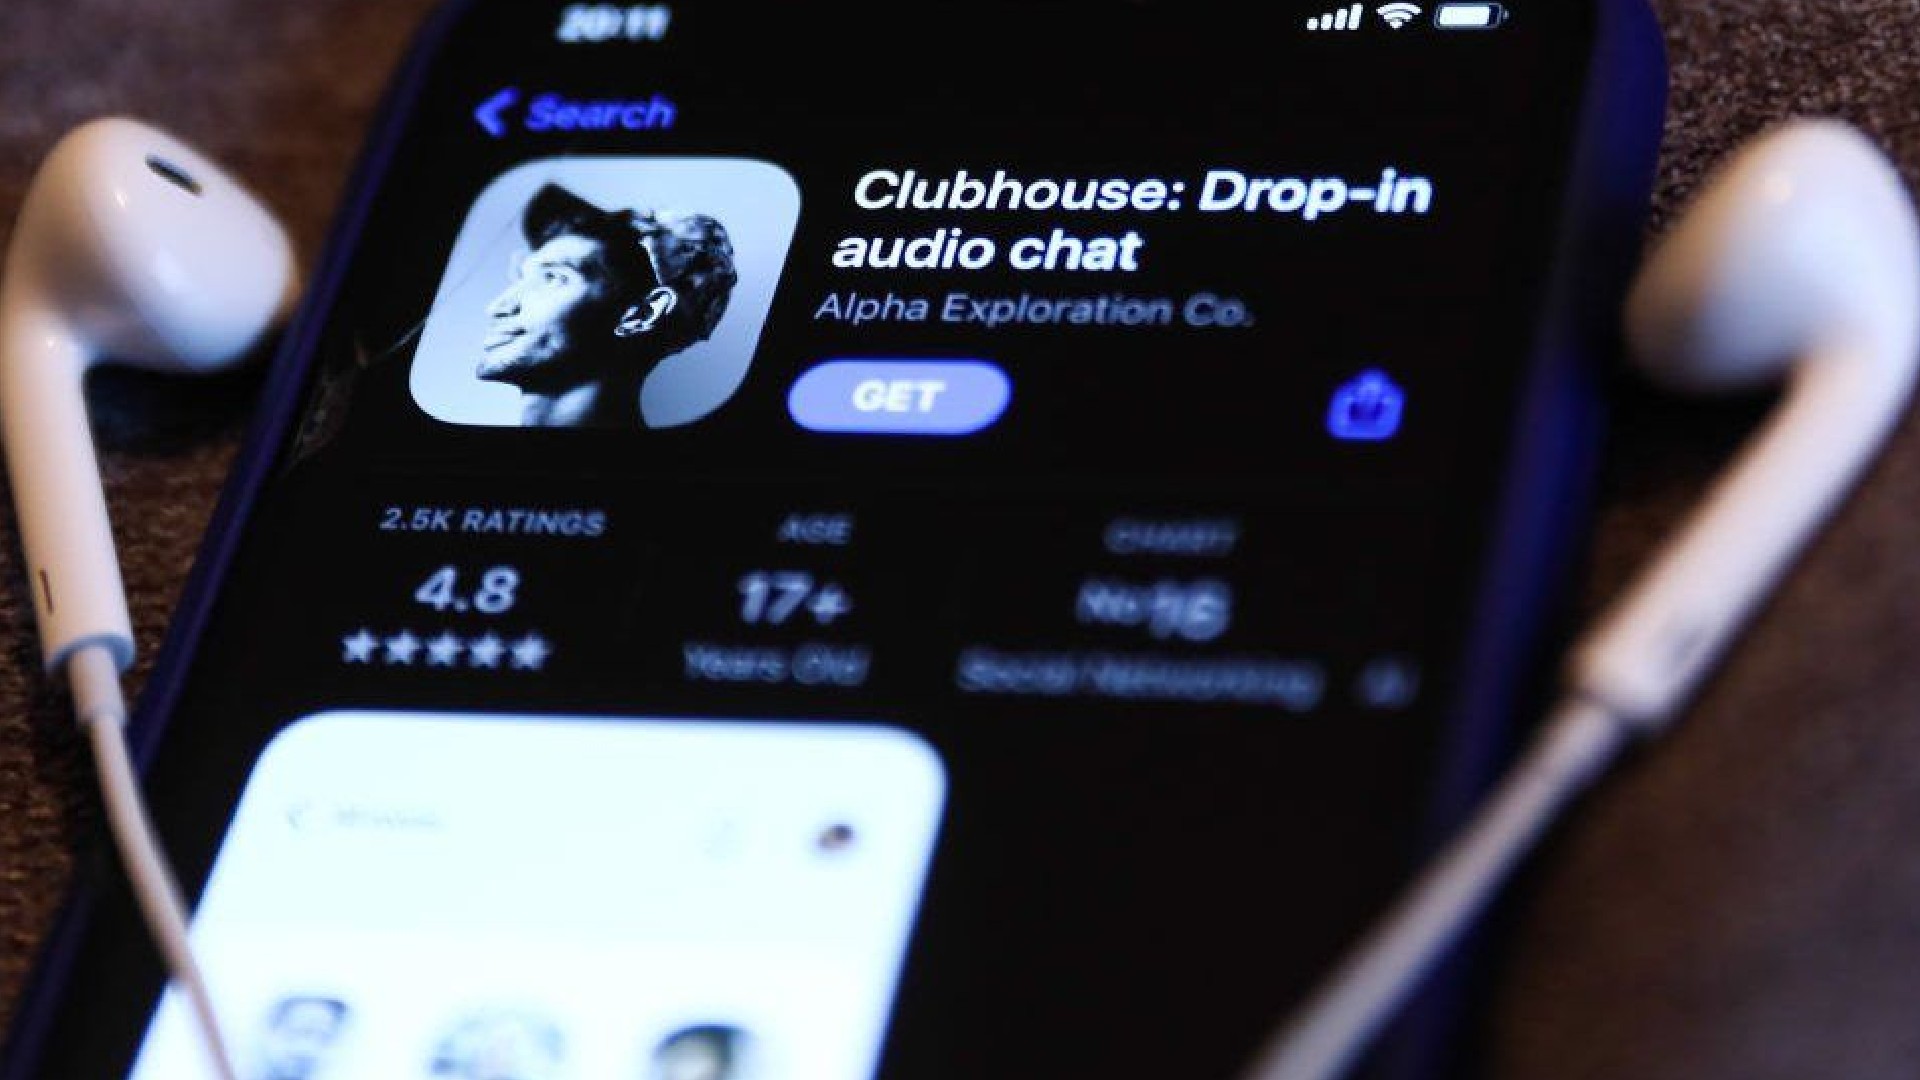 Clubhouse Android app now available for download in India